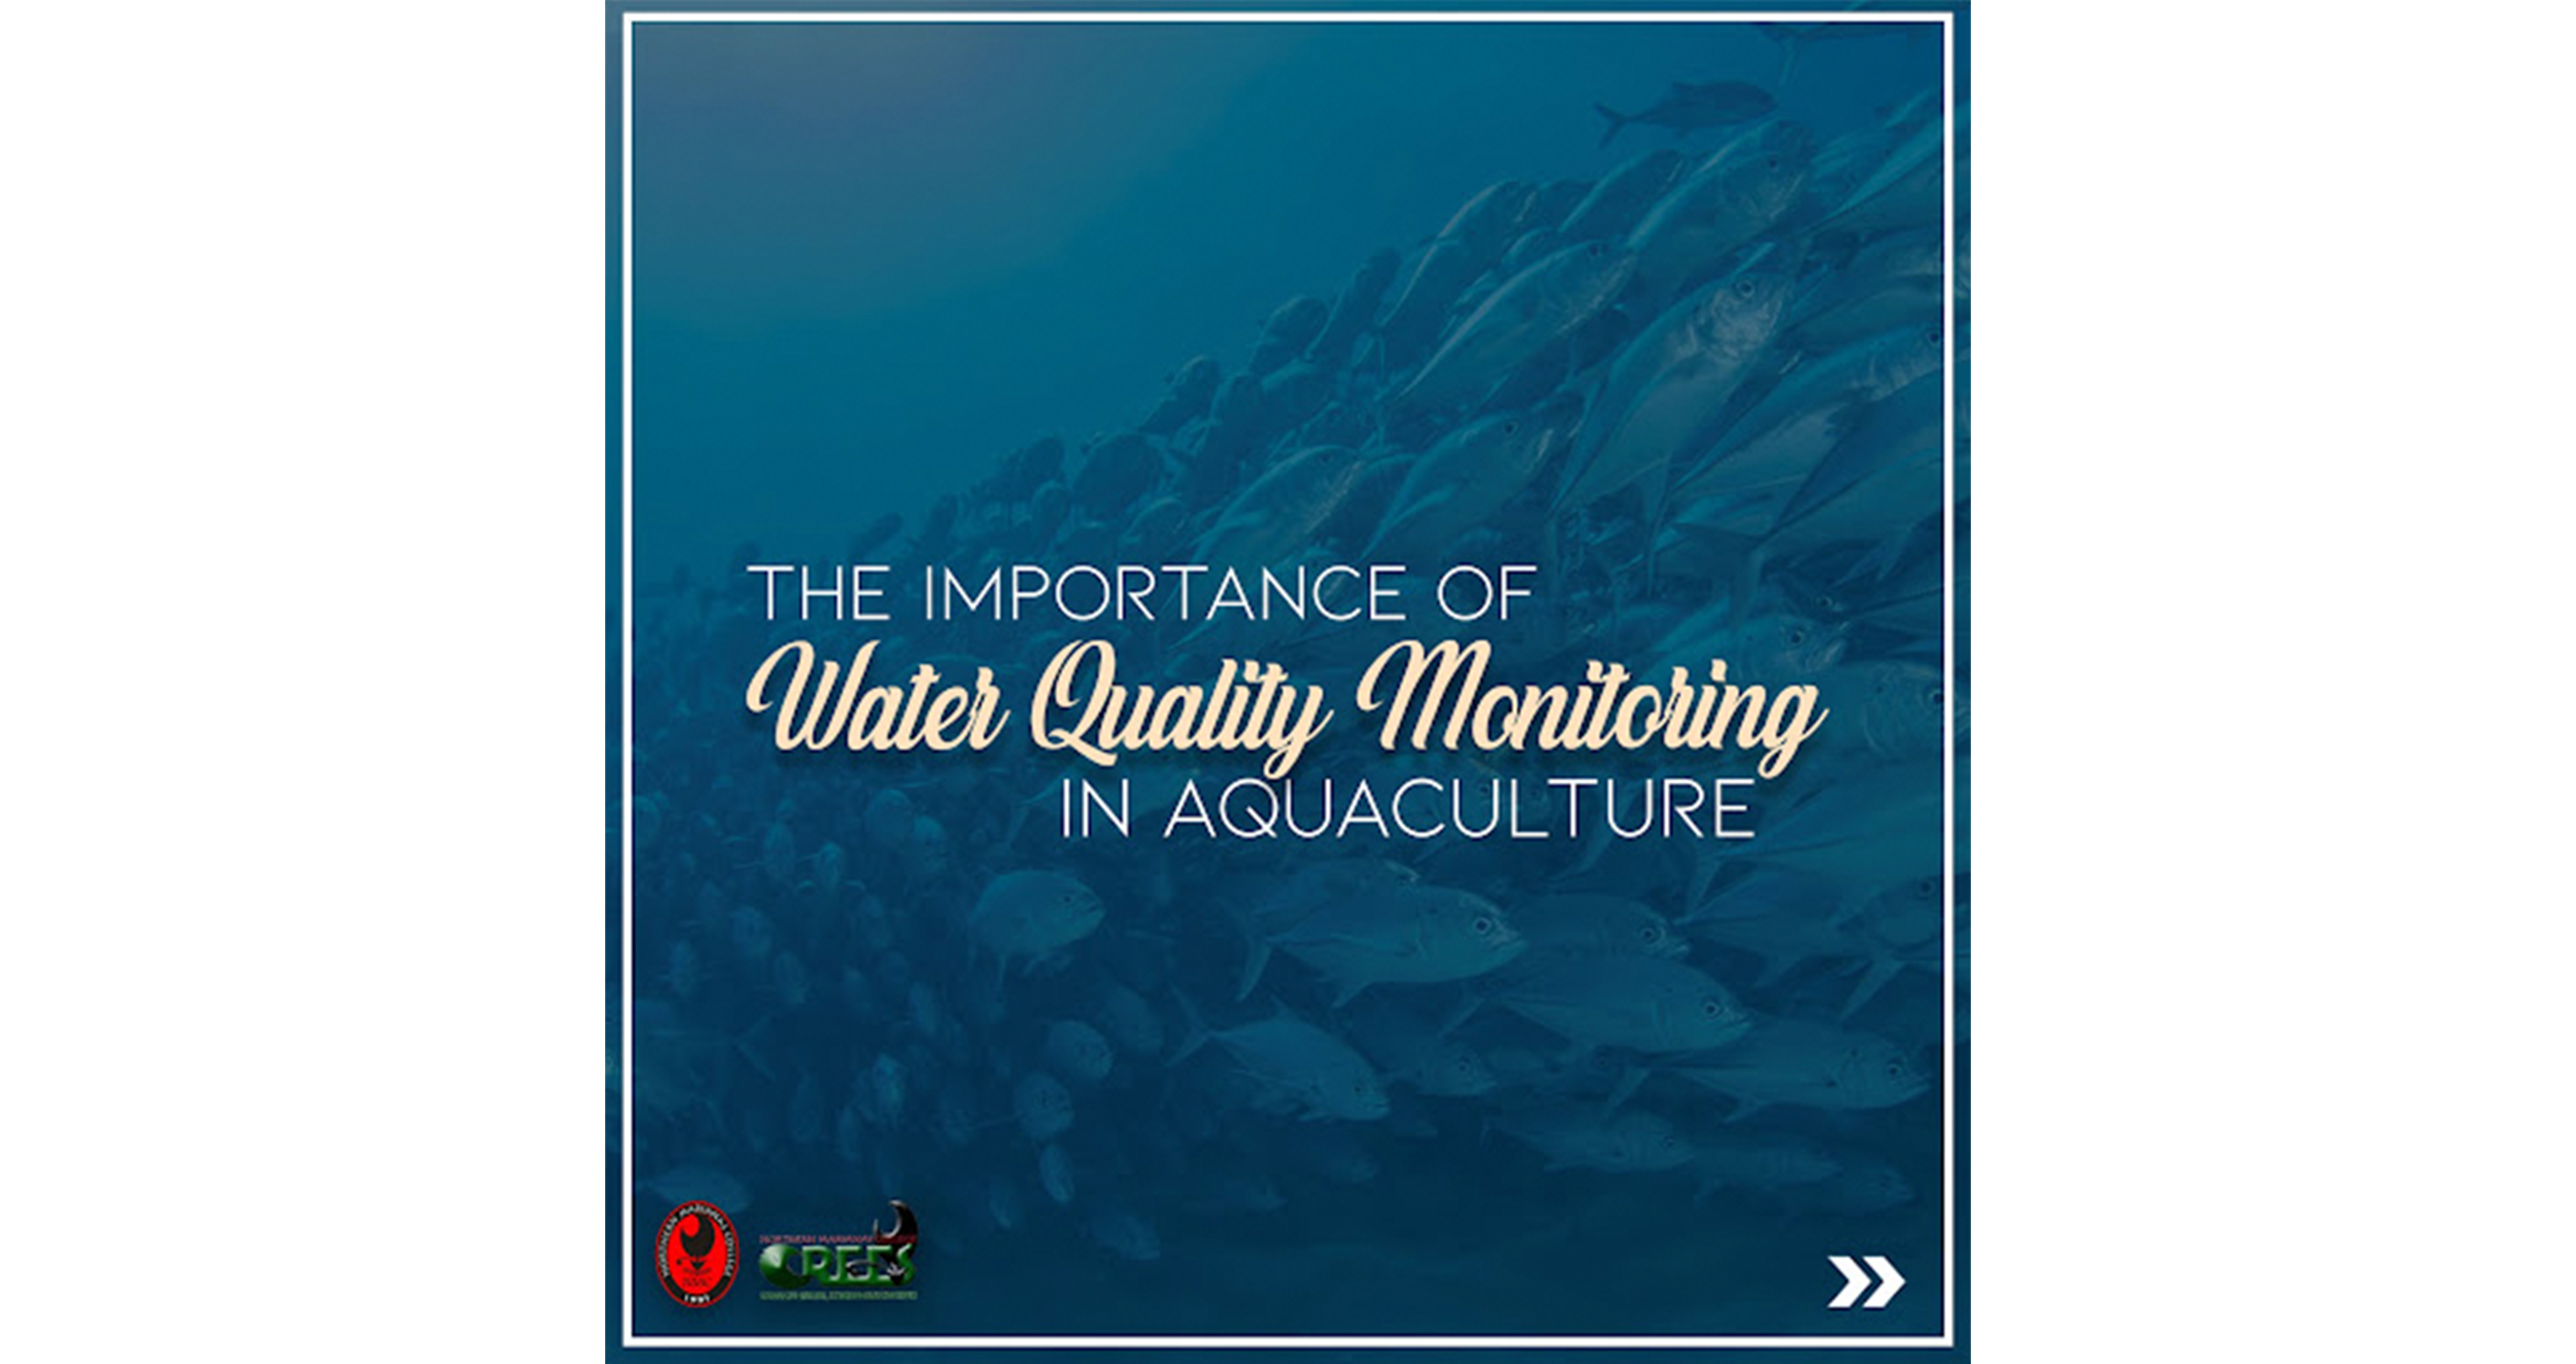 The Importance of Water Quality Monitoring in Aquaculture